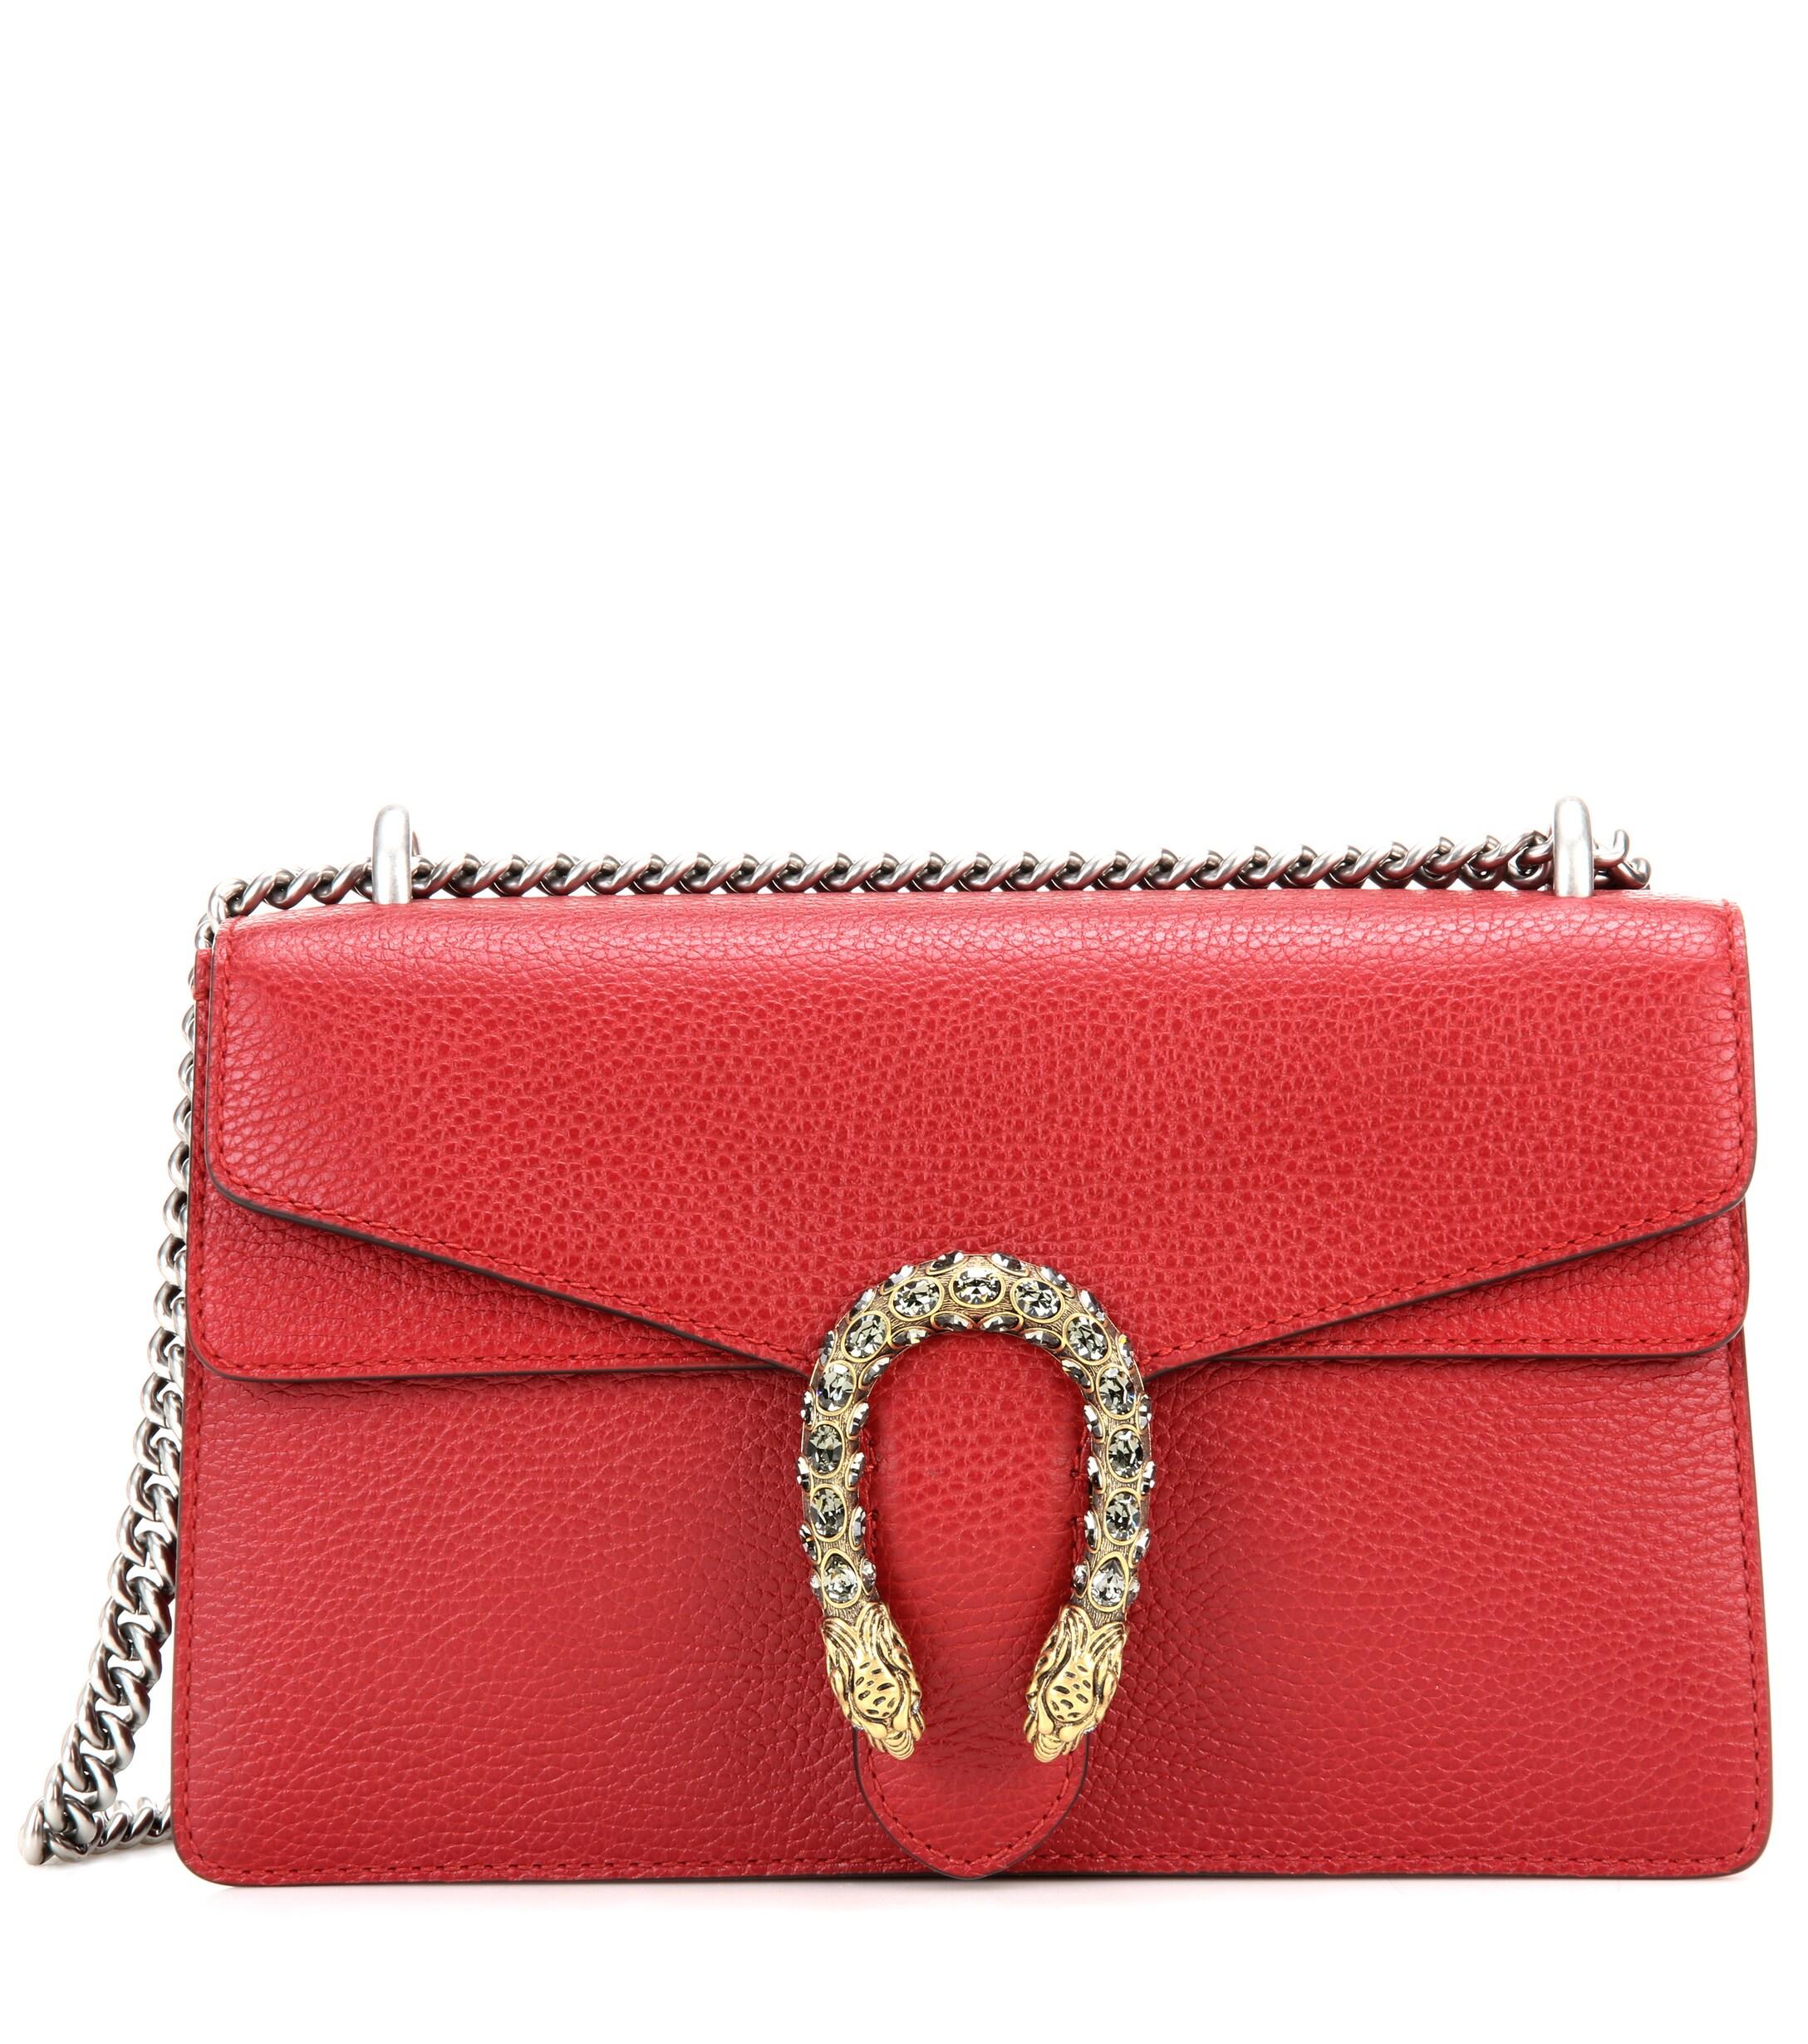 Gucci Dionysus Small Leather Shoulder Bag in Red - Lyst